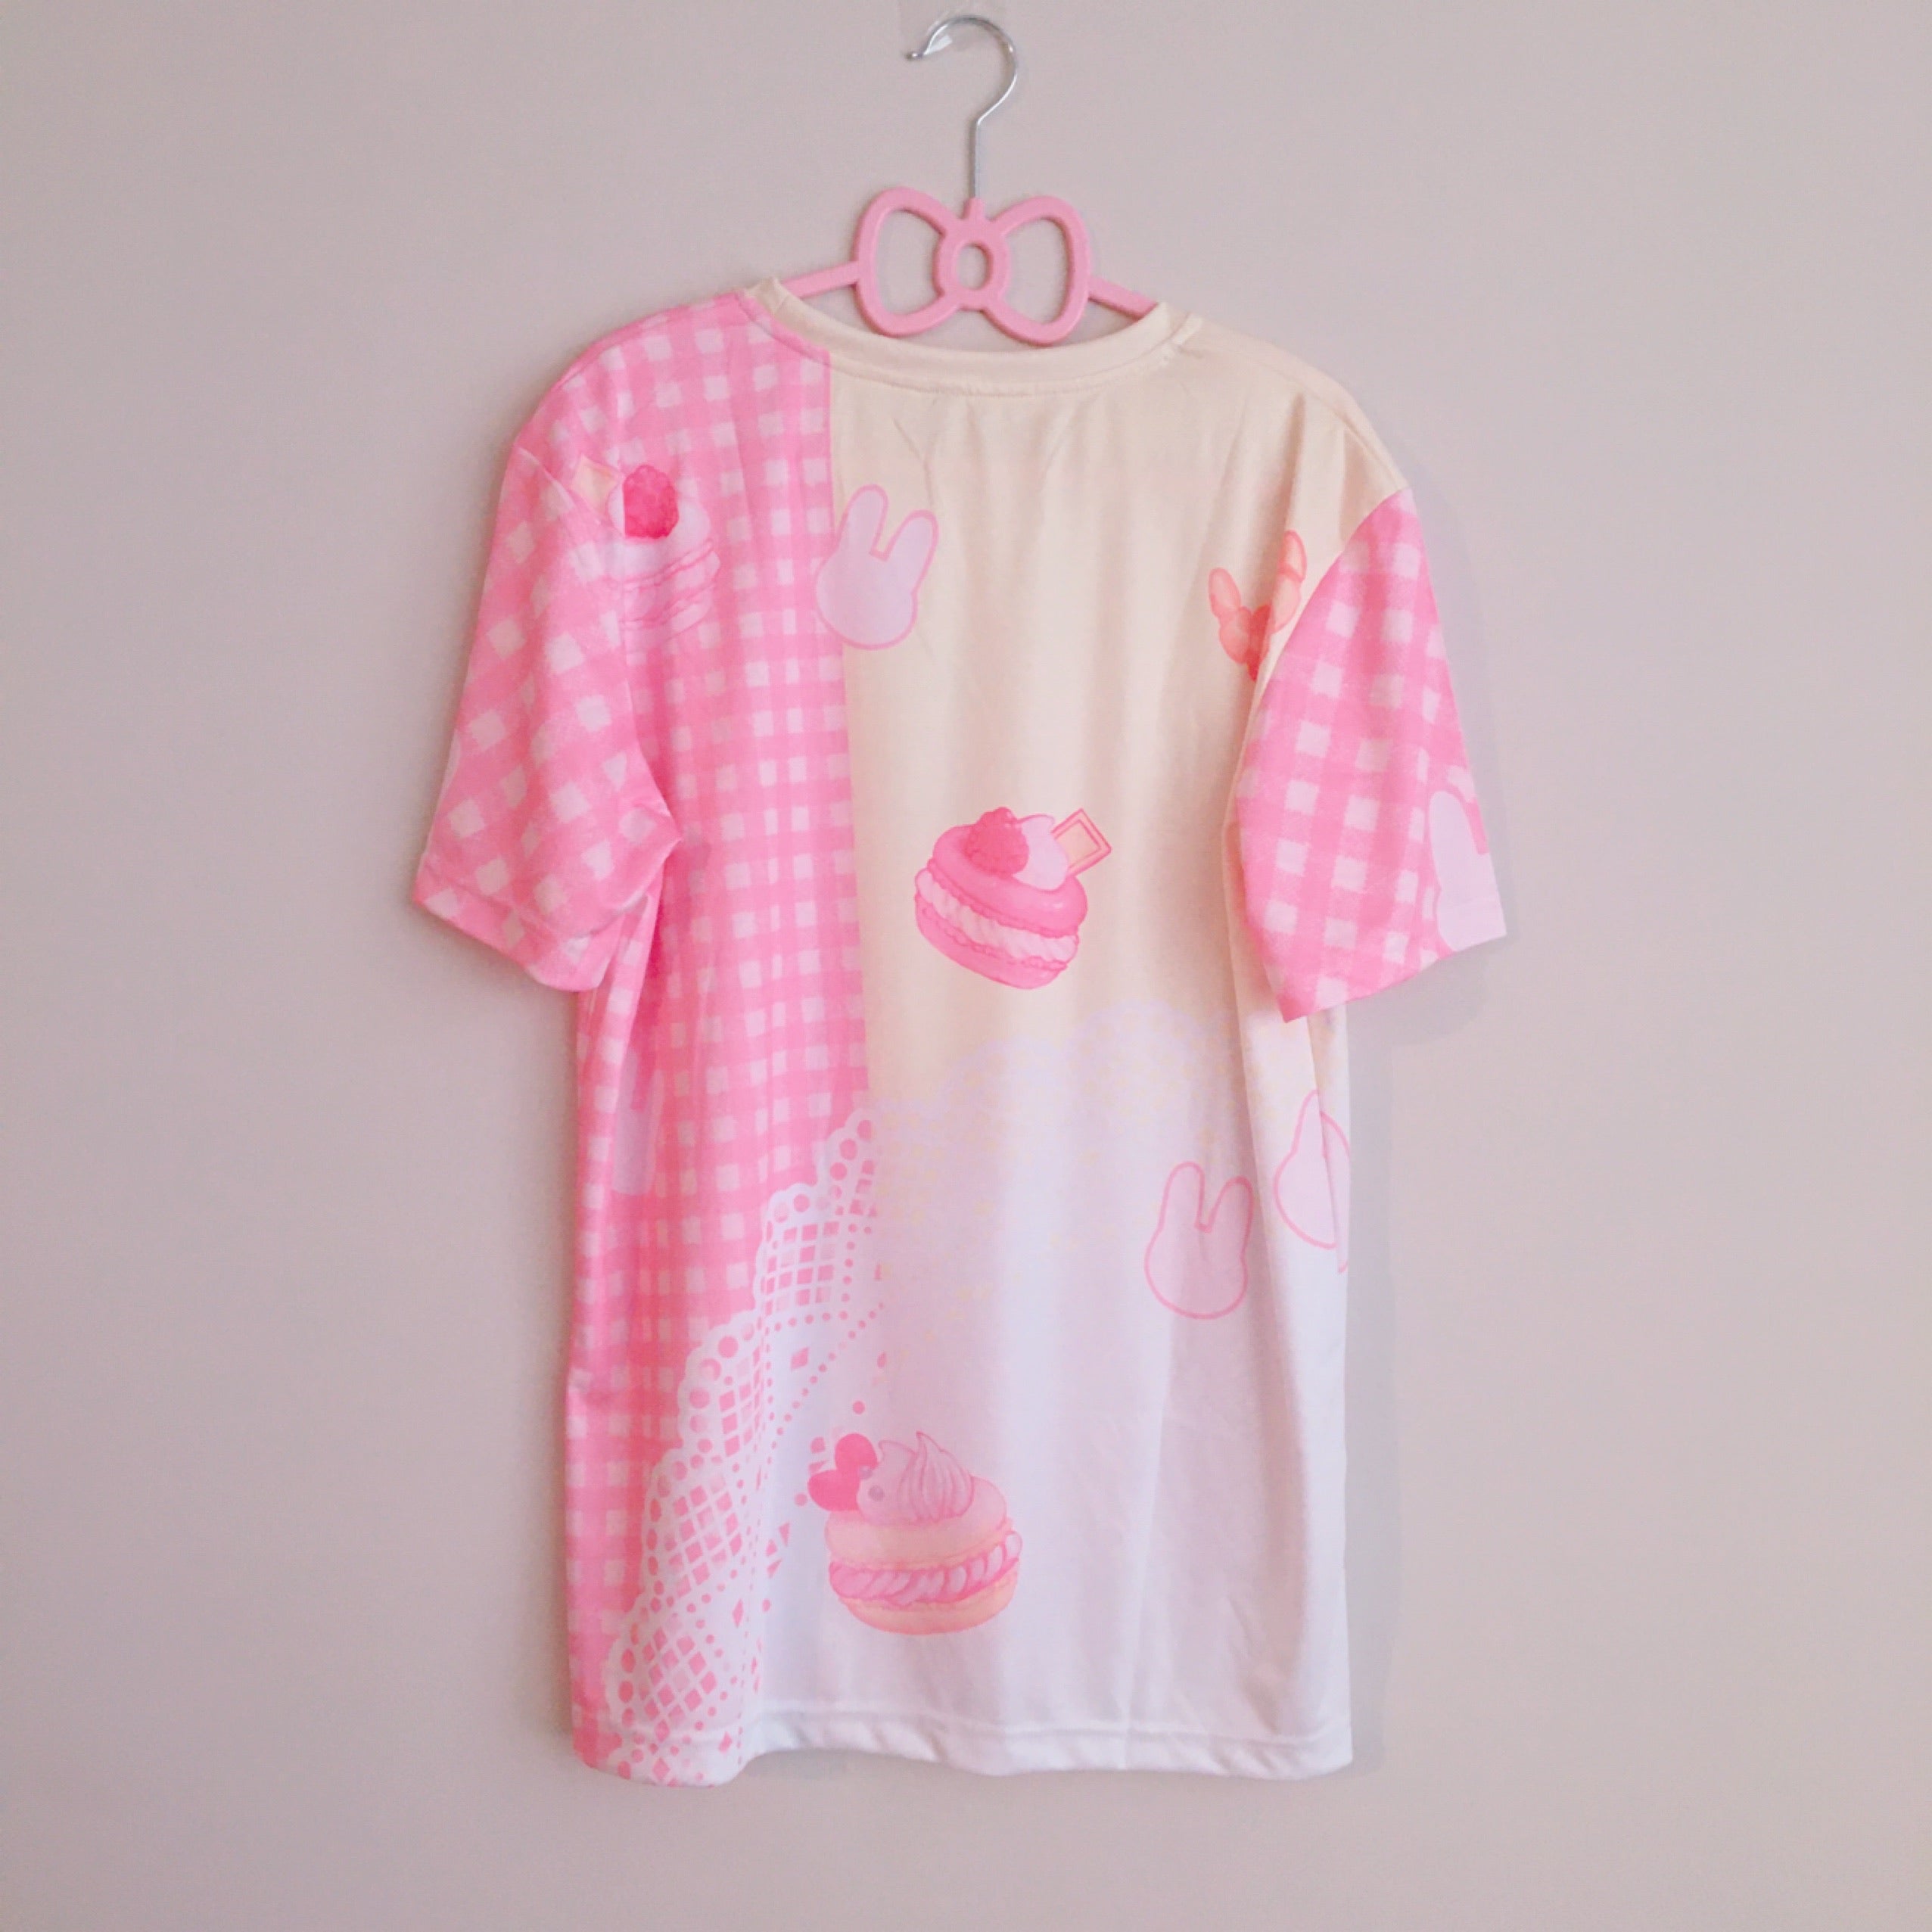 Pia Sweets Cafe T-Shirt by fawnbomb (Pre-order) - peachiieshop